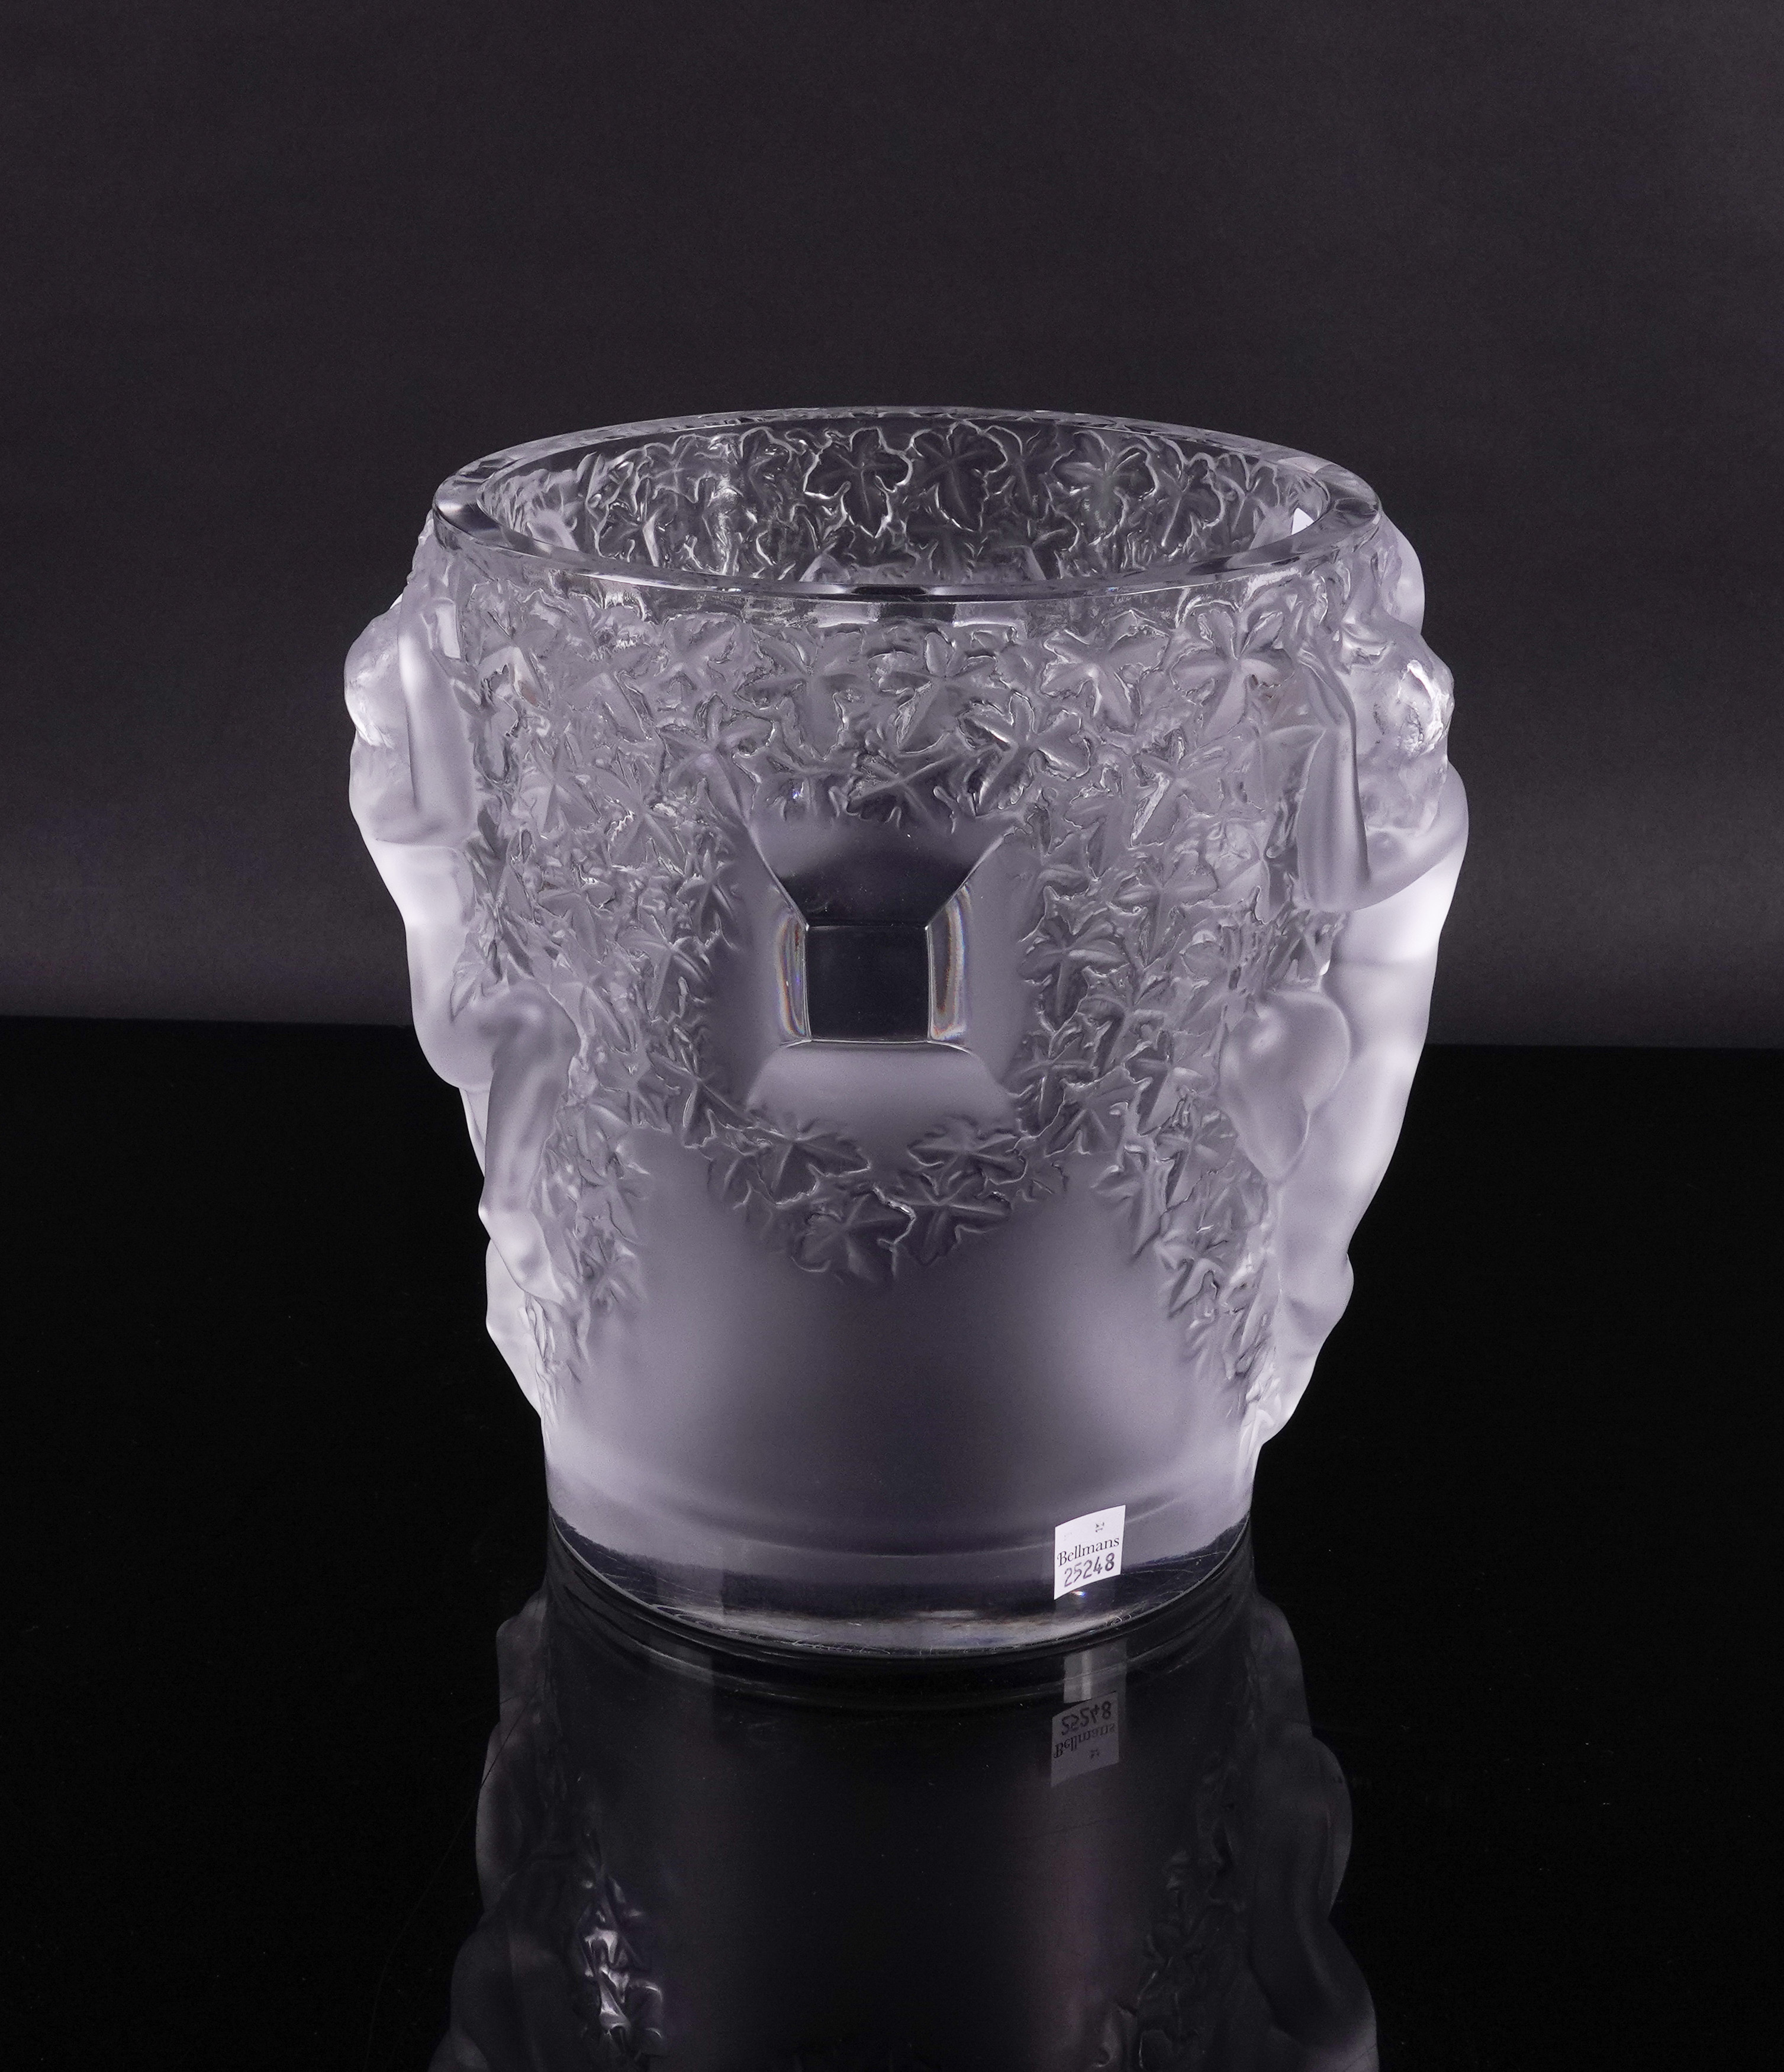 `GANYMEDE'. A LALIQUE FROSTED GLASS CHAMPAGNE BUCKET - Image 3 of 4